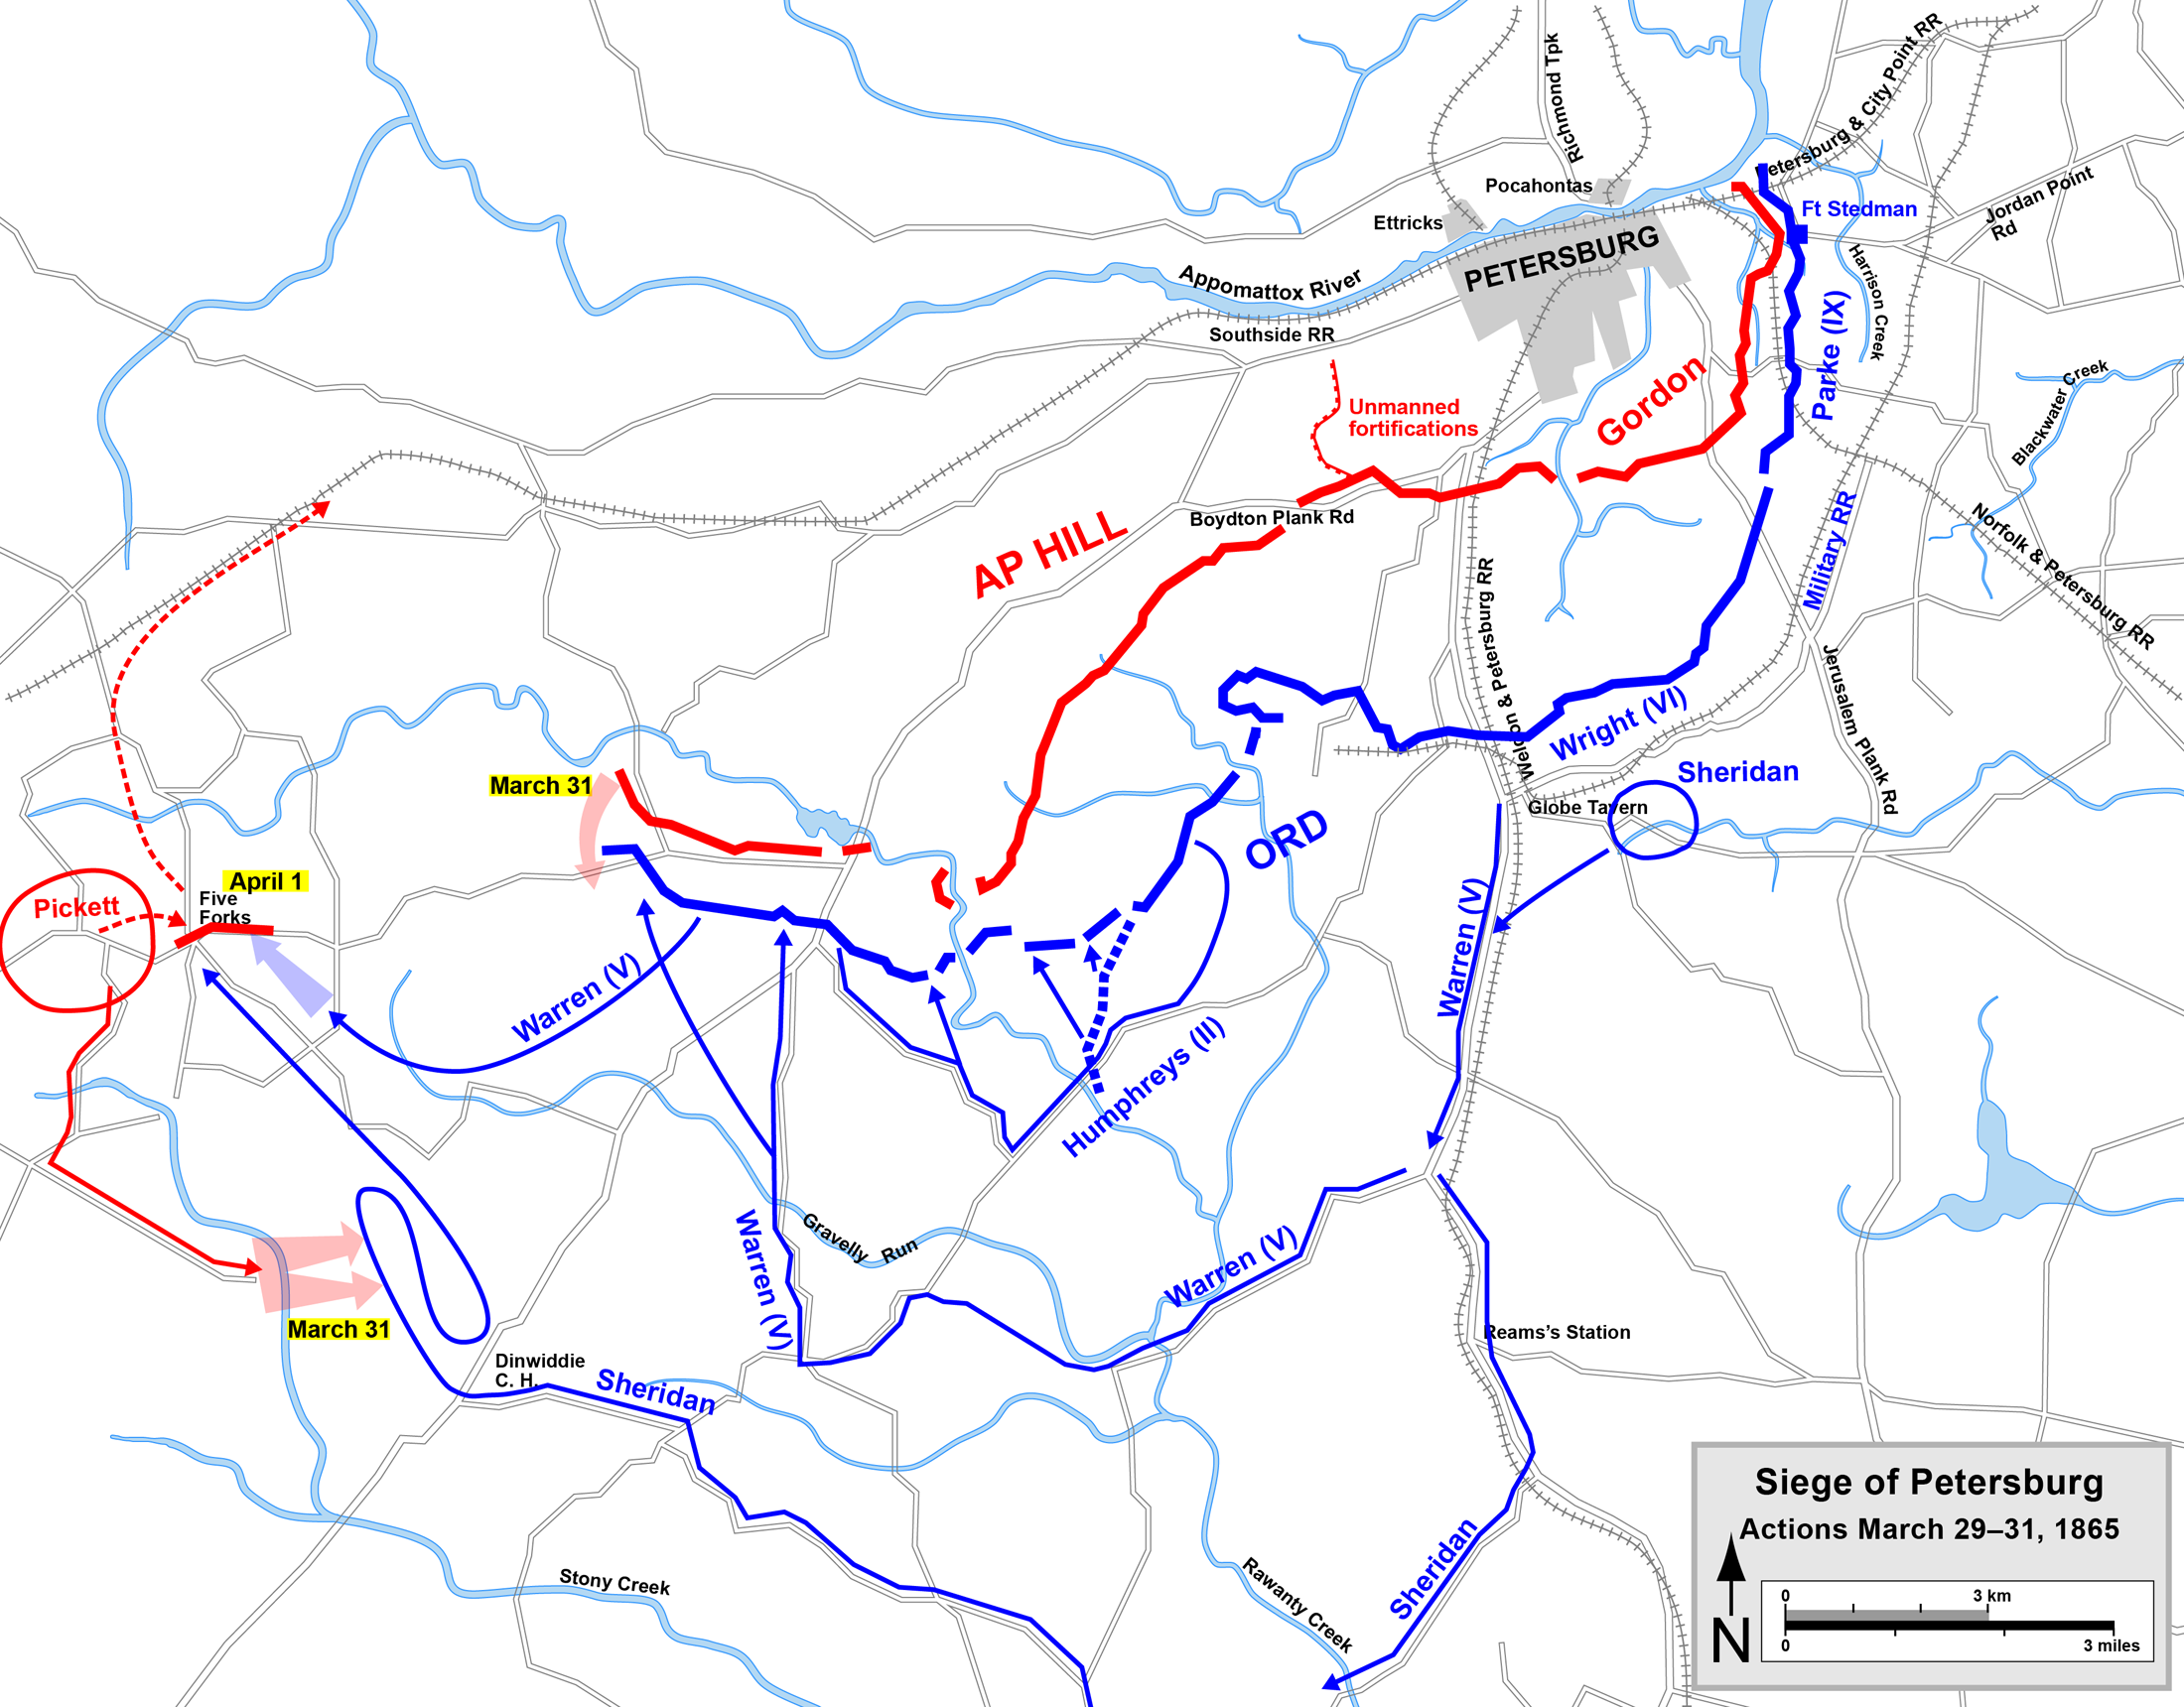 Actions at Petersburg before and during the Battle of Five Forks.